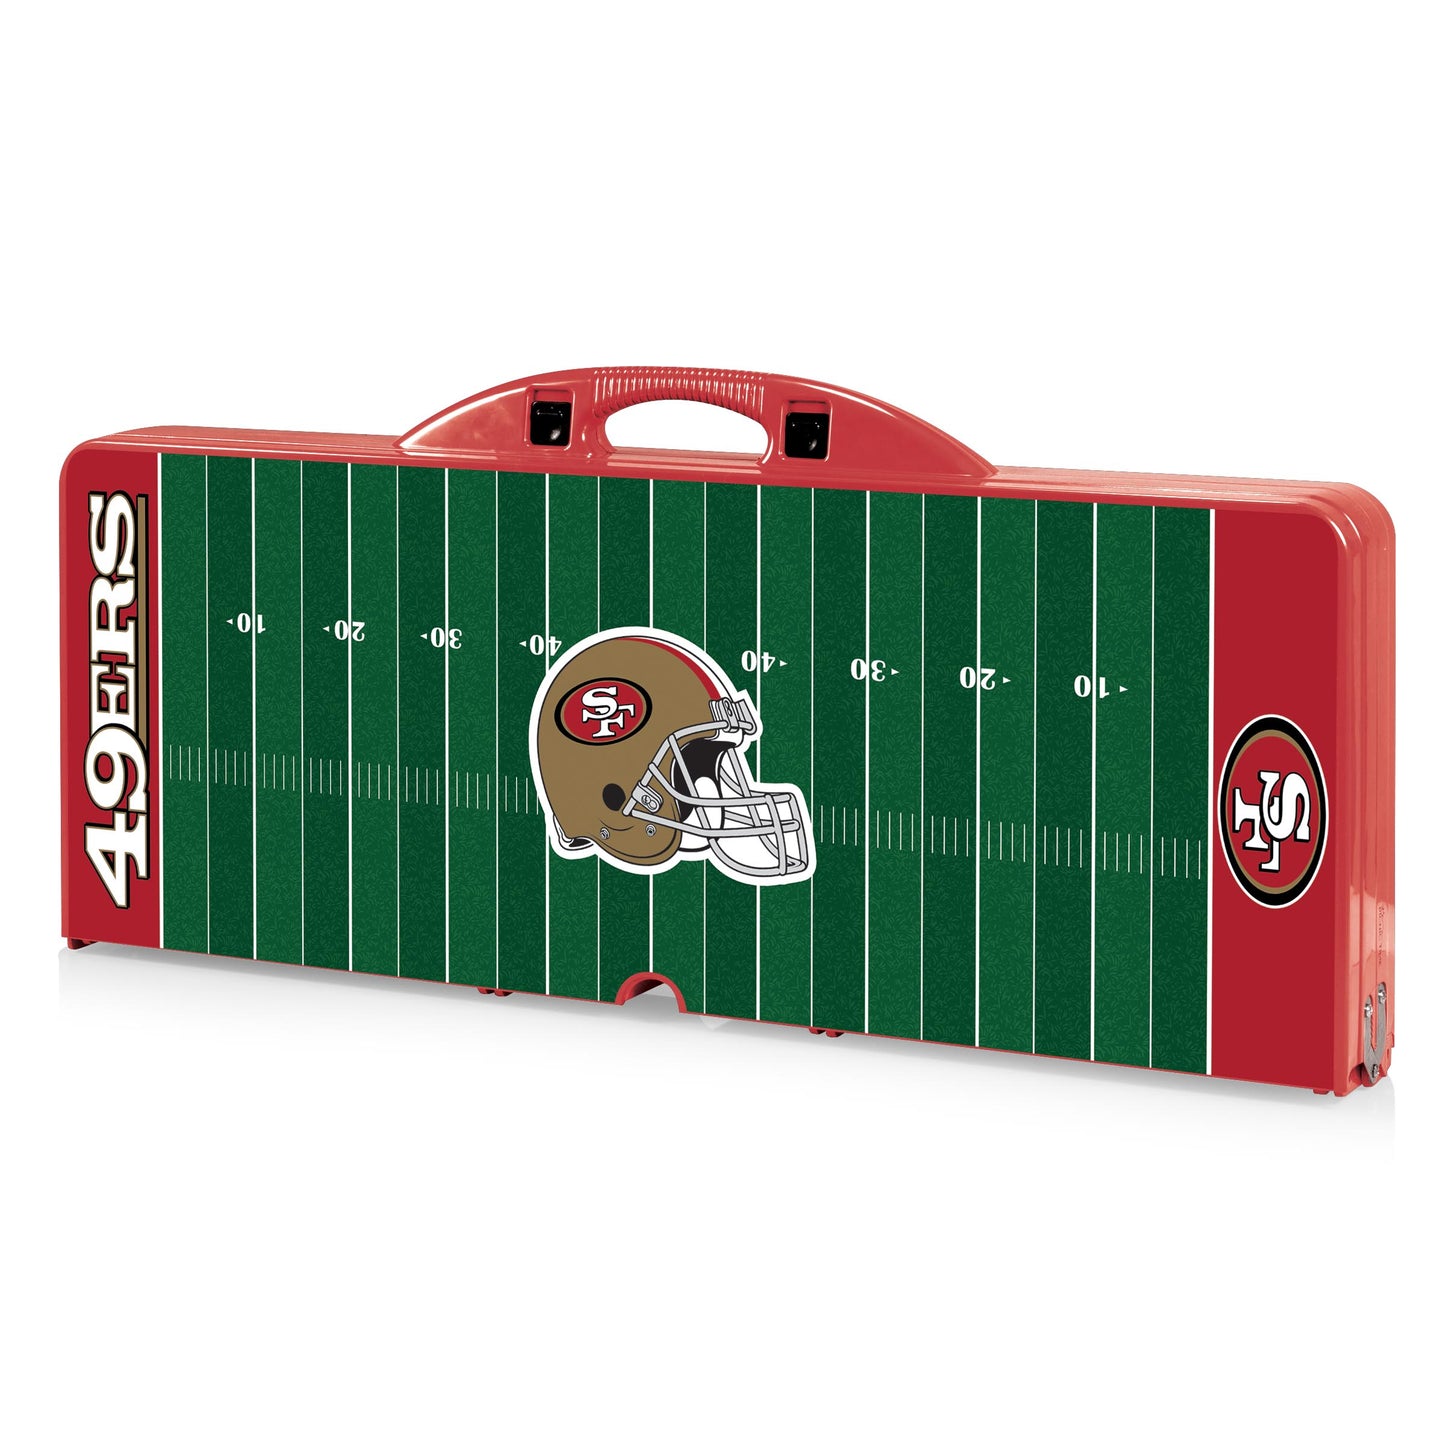 San Francisco 49ers - Picnic Table Portable Folding Table with Seats and Umbrella